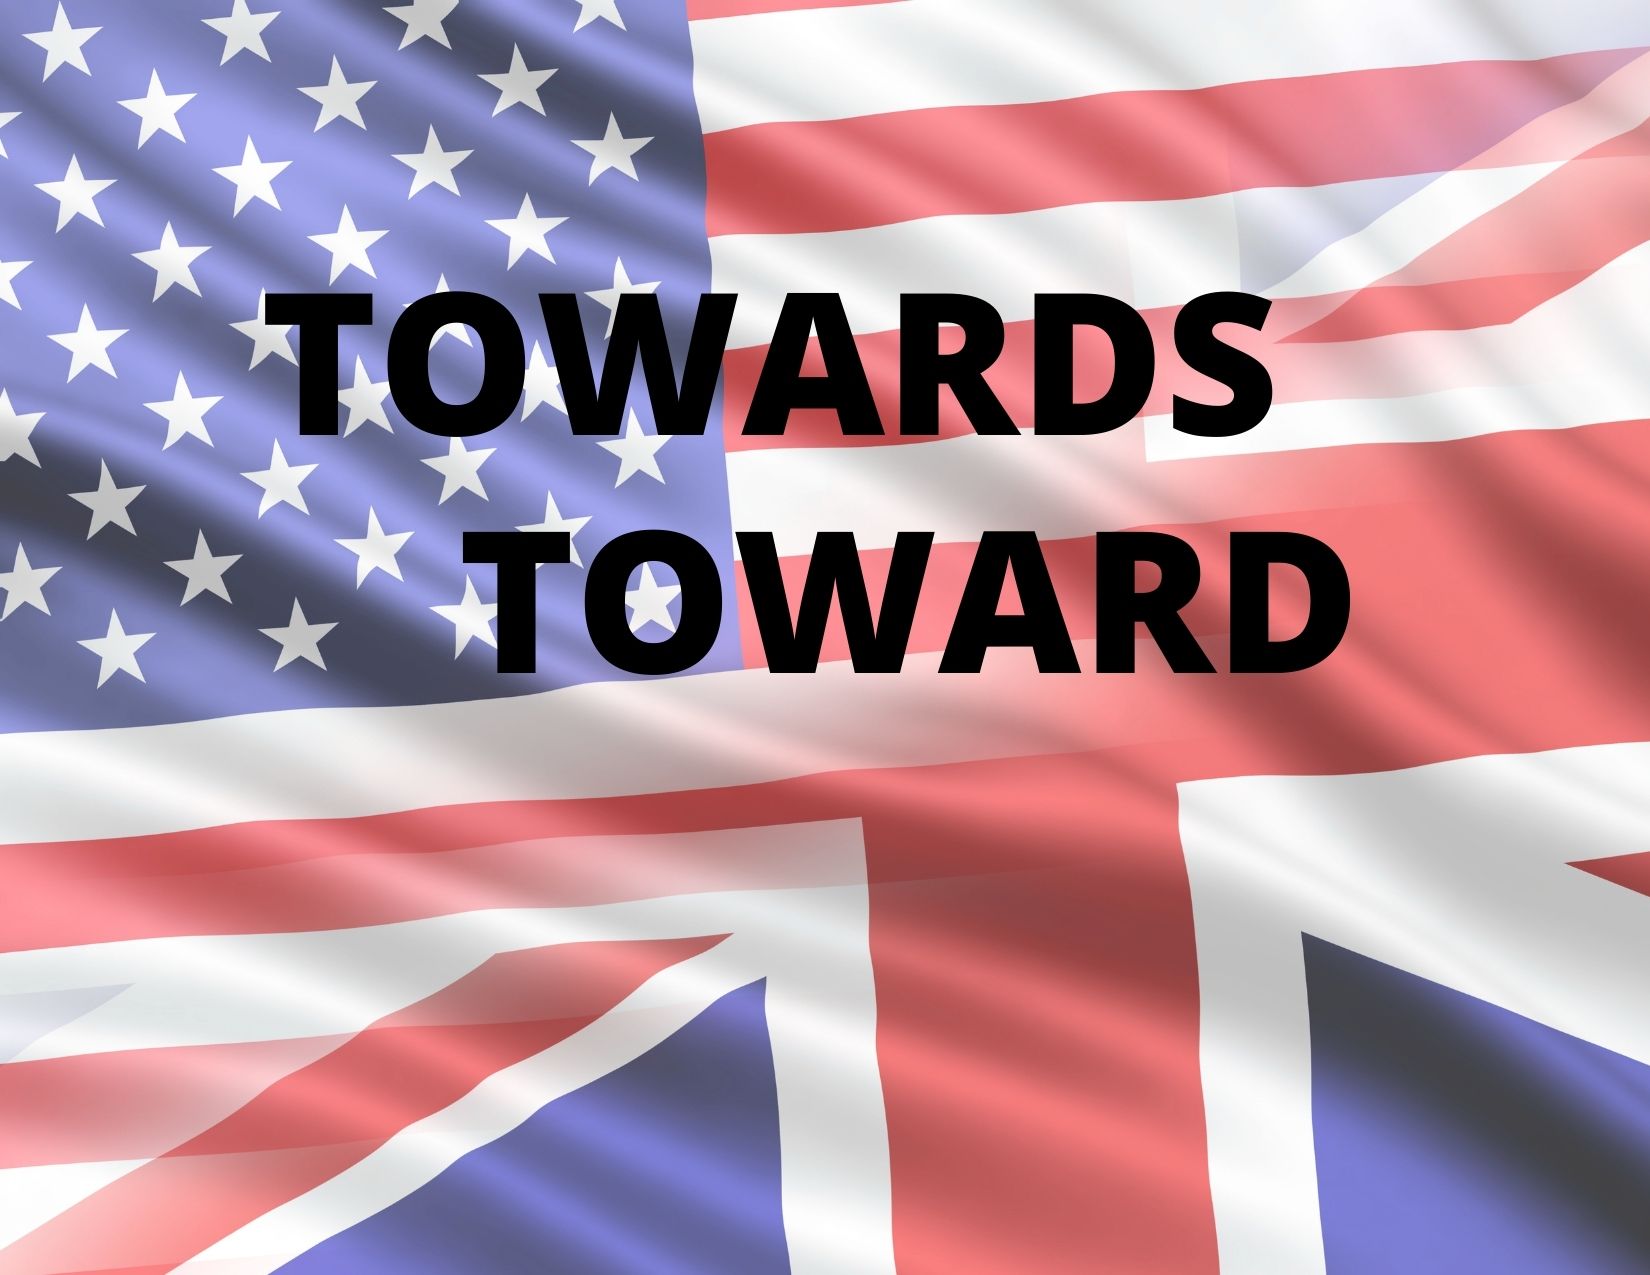 British and American flags merged with the words towards or toward to signify different spellings